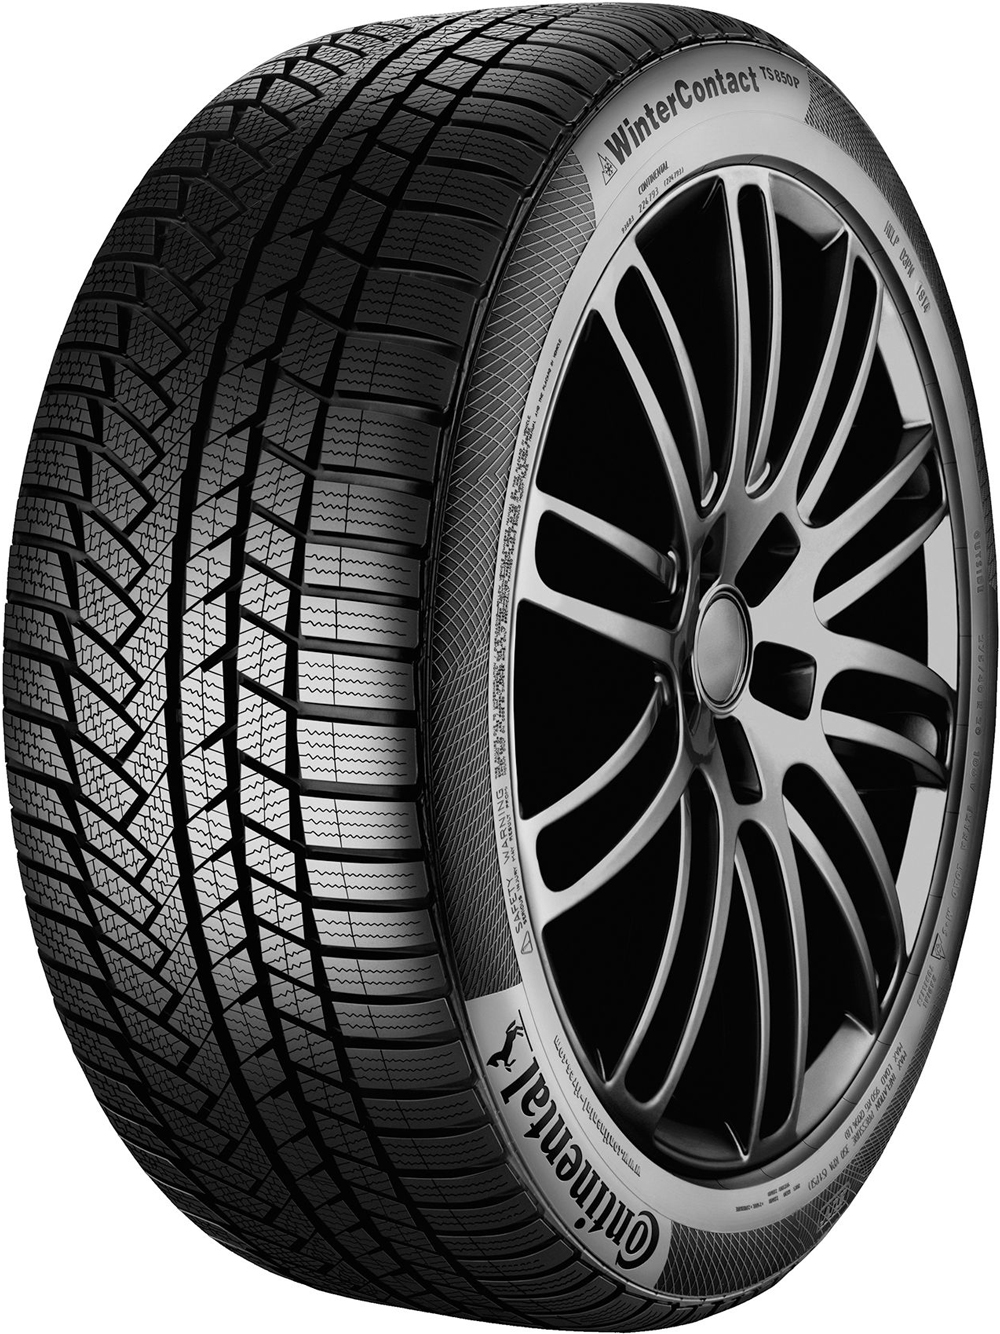 Anvelope jeep CONTINENTAL TS850 P SUV AO AUDI FP 235/55 R19 101H